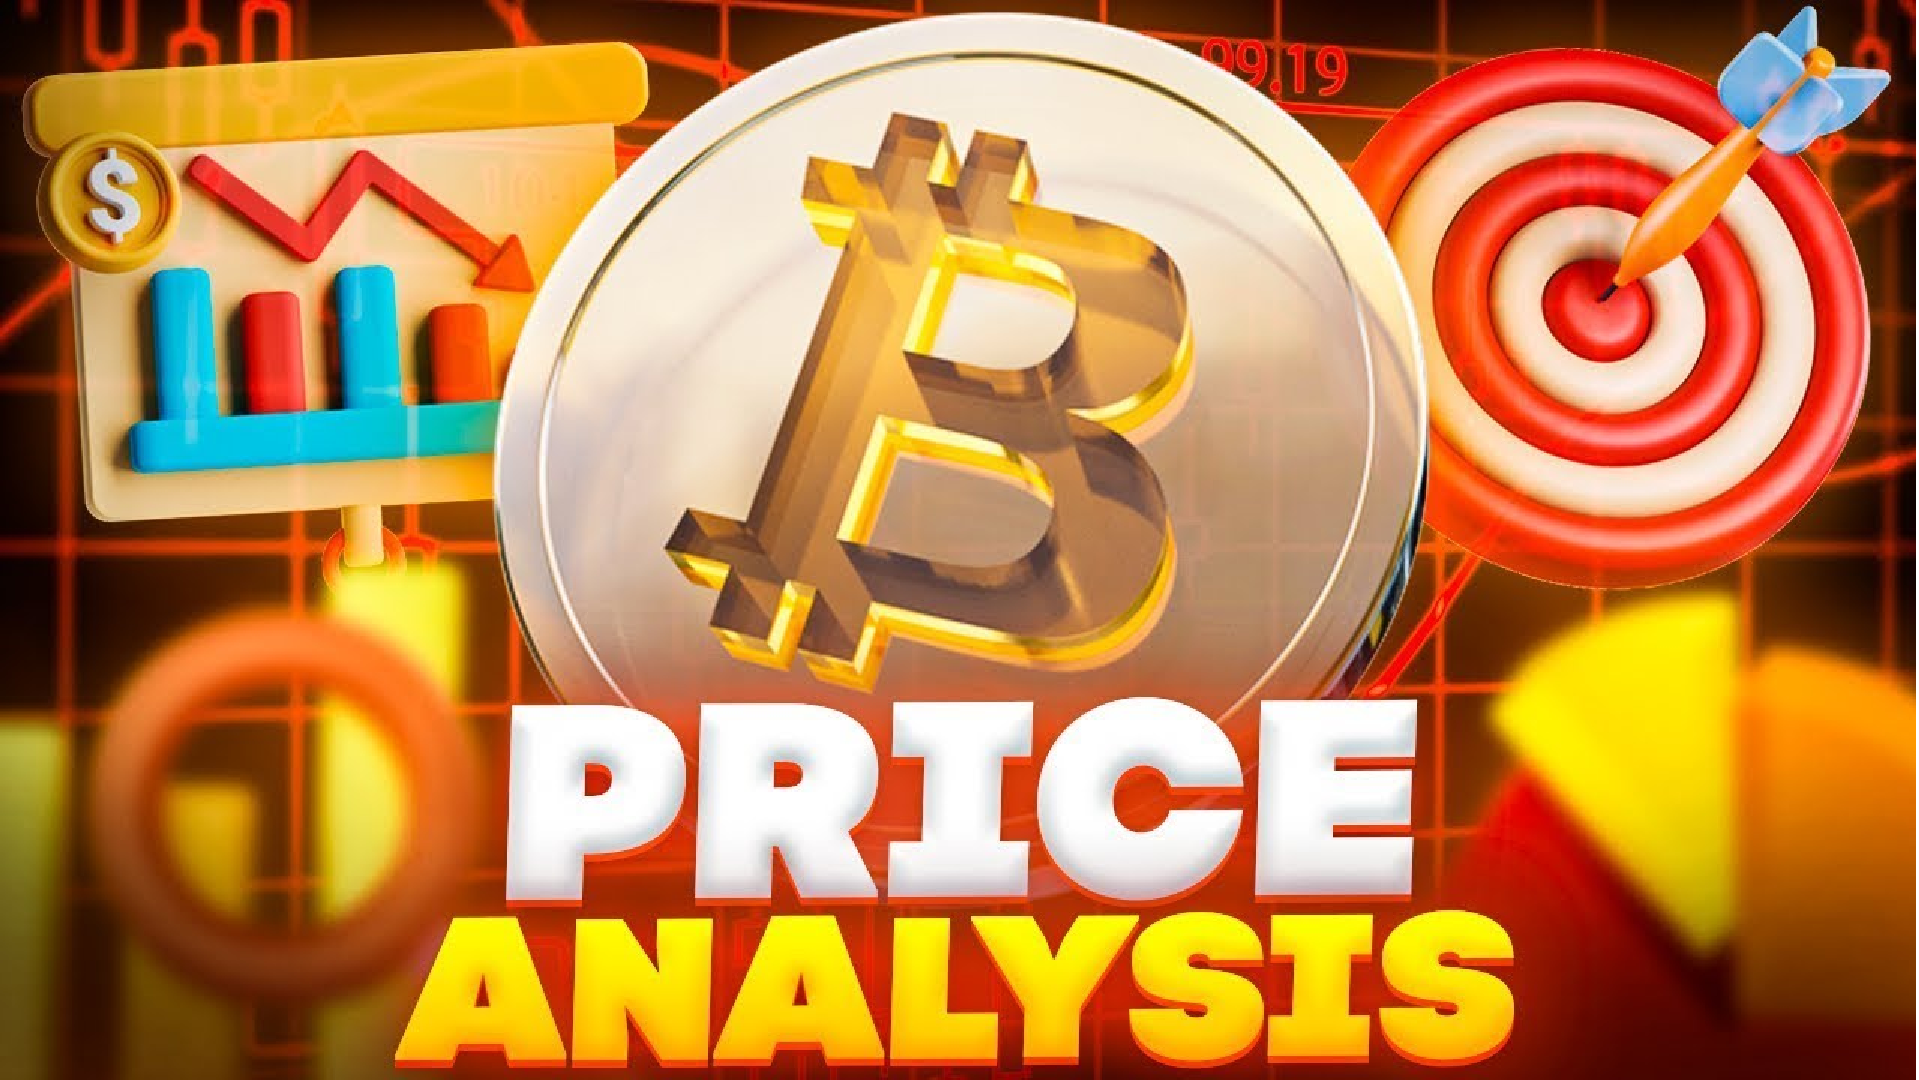 Bitcoin Technical Analysis – Is The BTC Price About To Enter Another Bear Market?